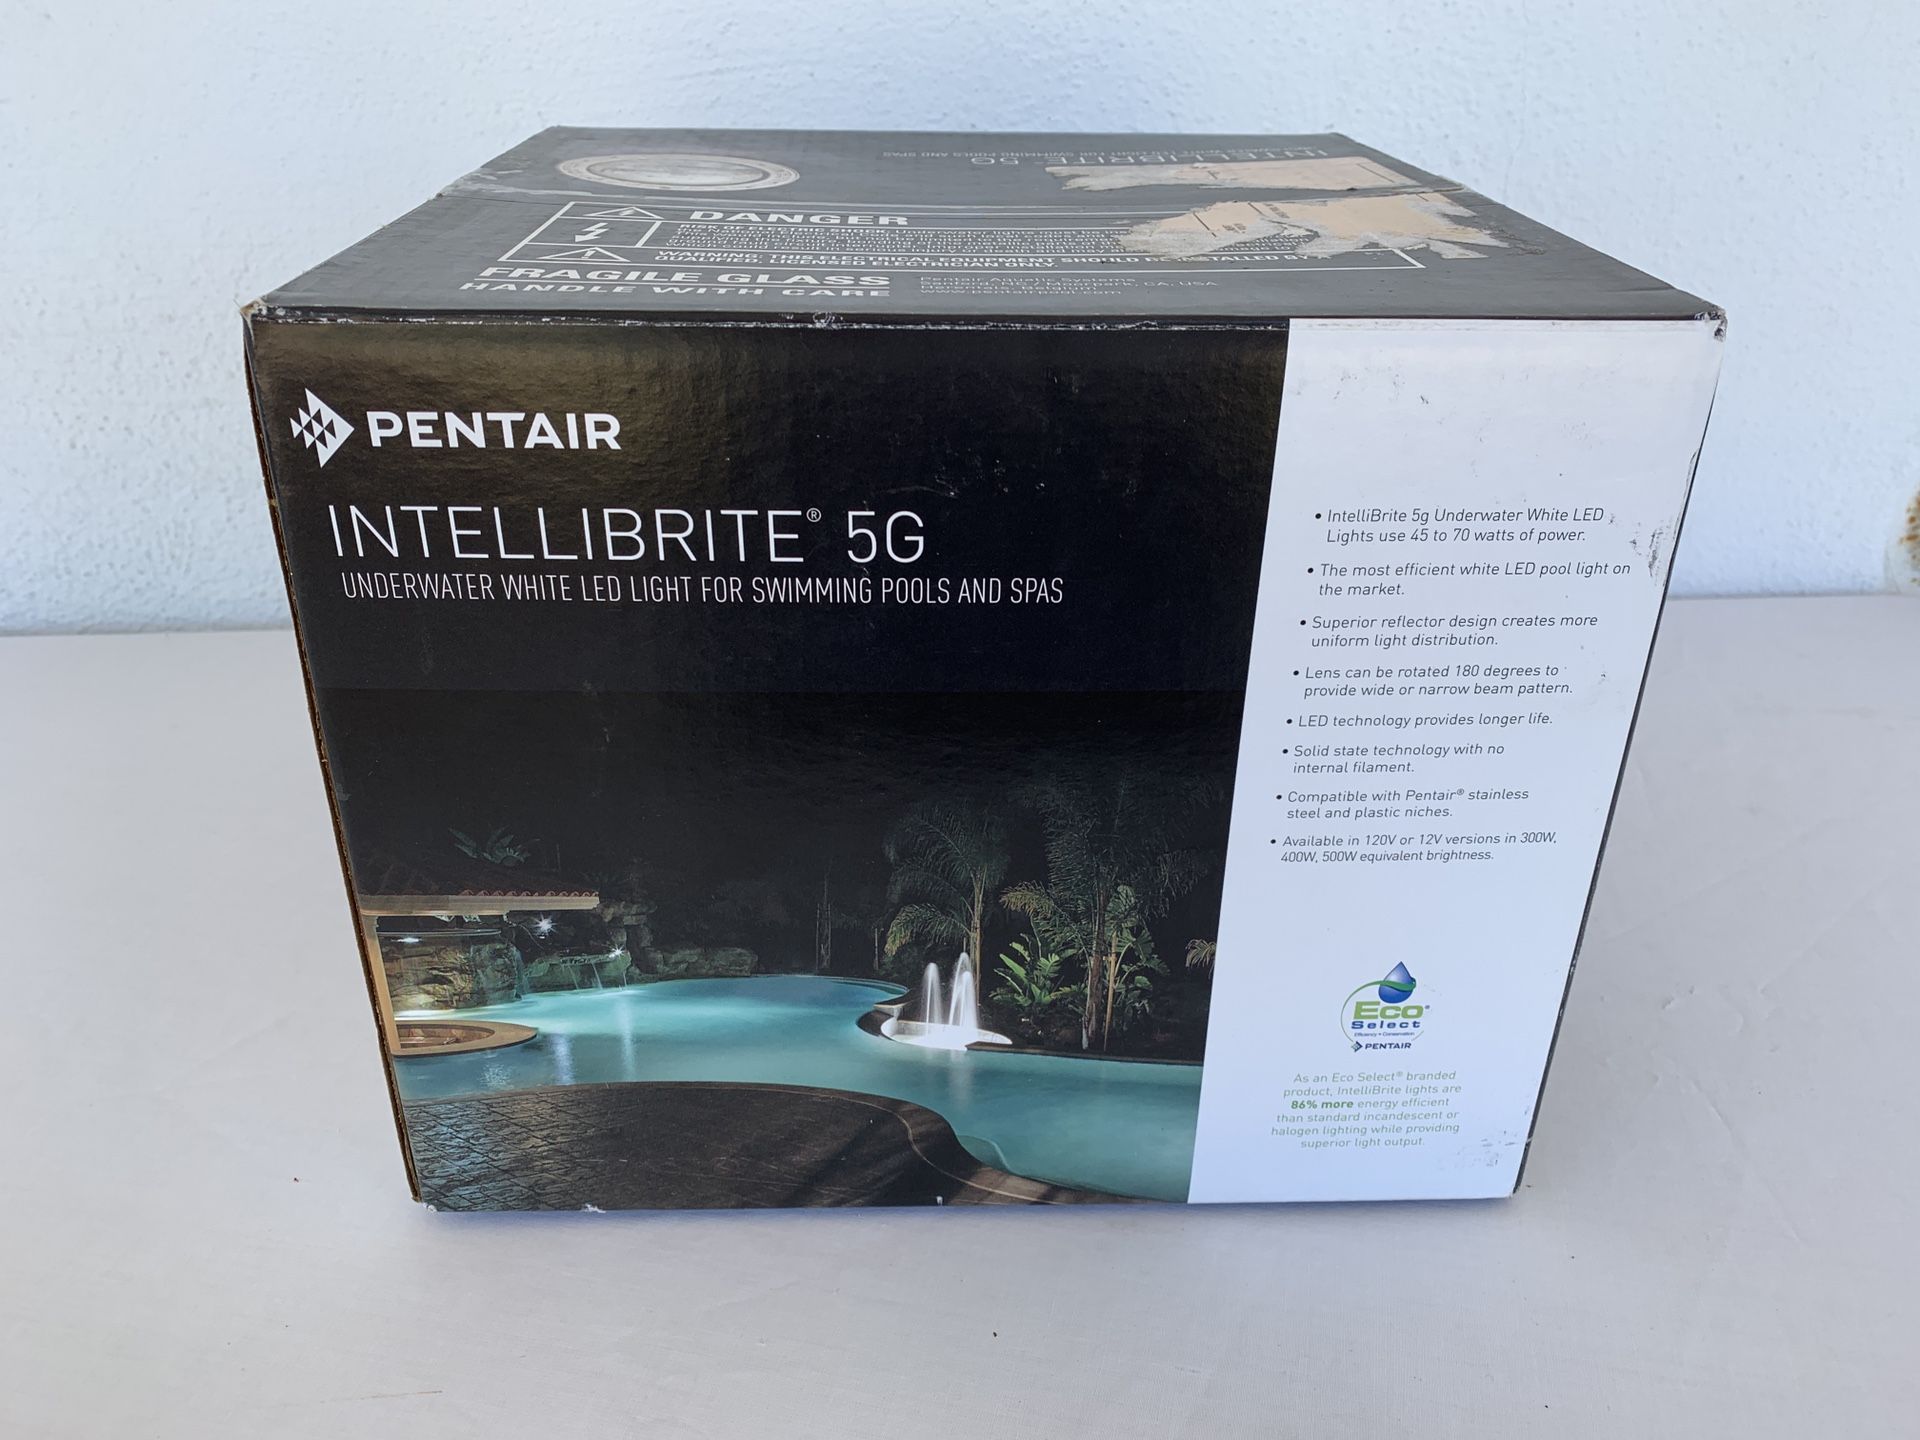 Pentair Intellibrite 5g white LED pool light, 500w brightness, new in sealed box, 50 ft cord, 1 of 2